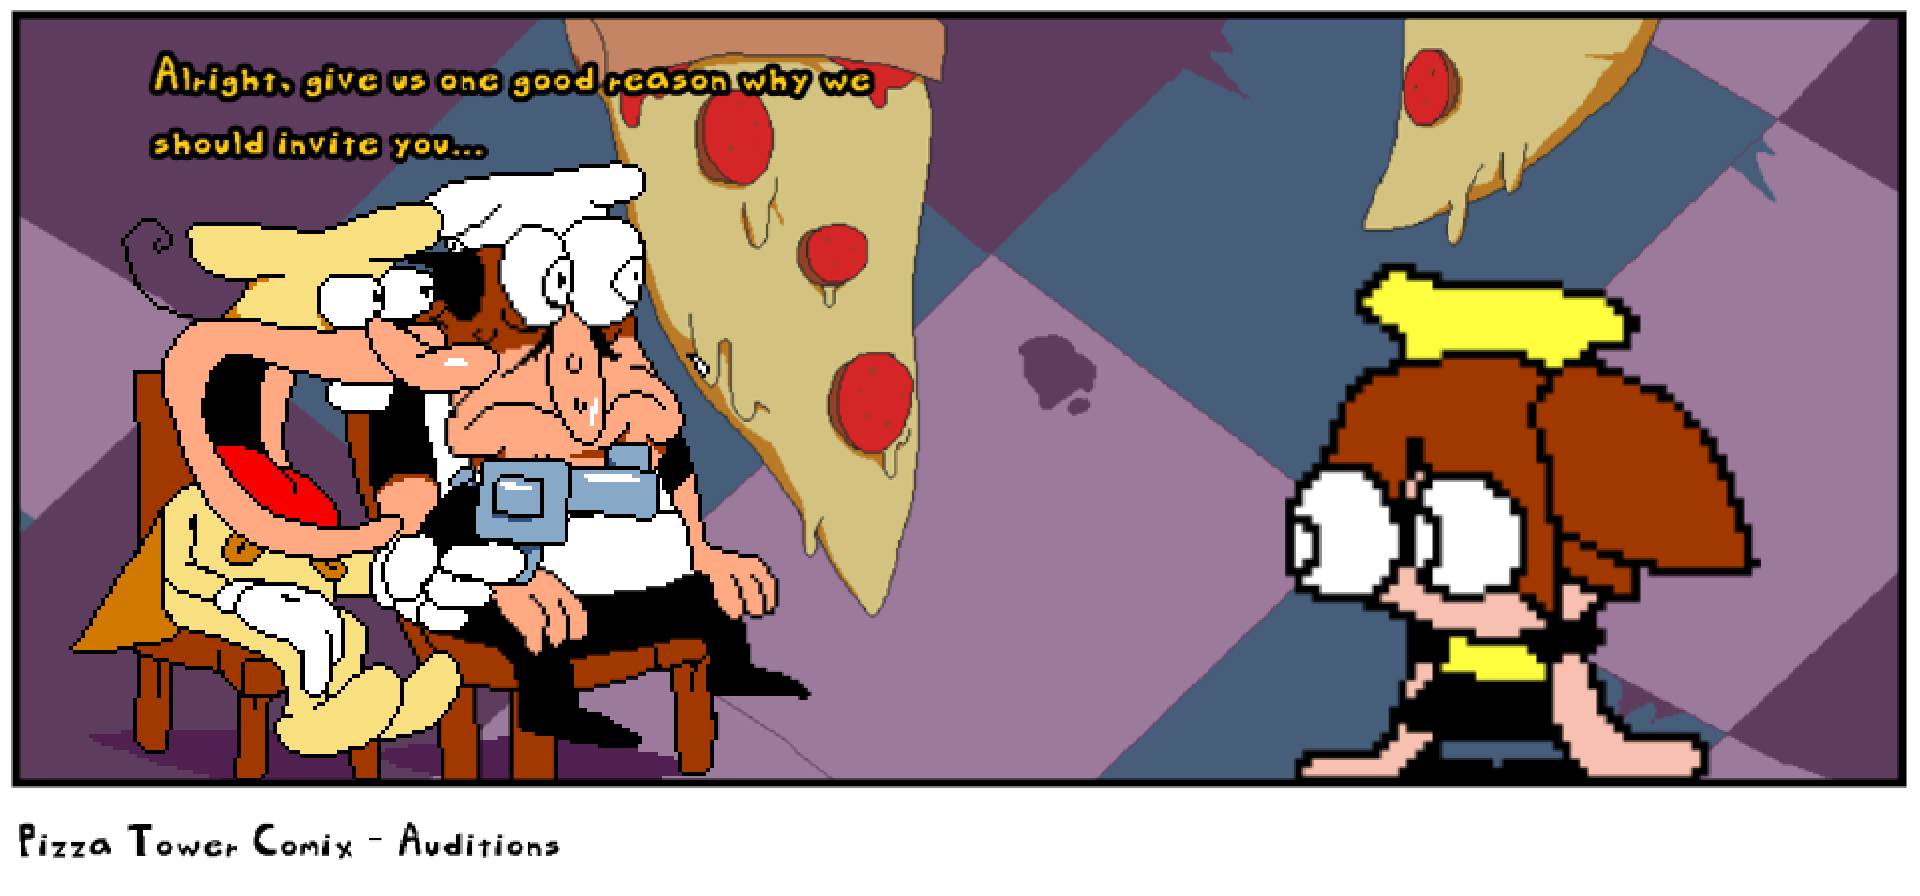 Pizza Tower Comix - Auditions